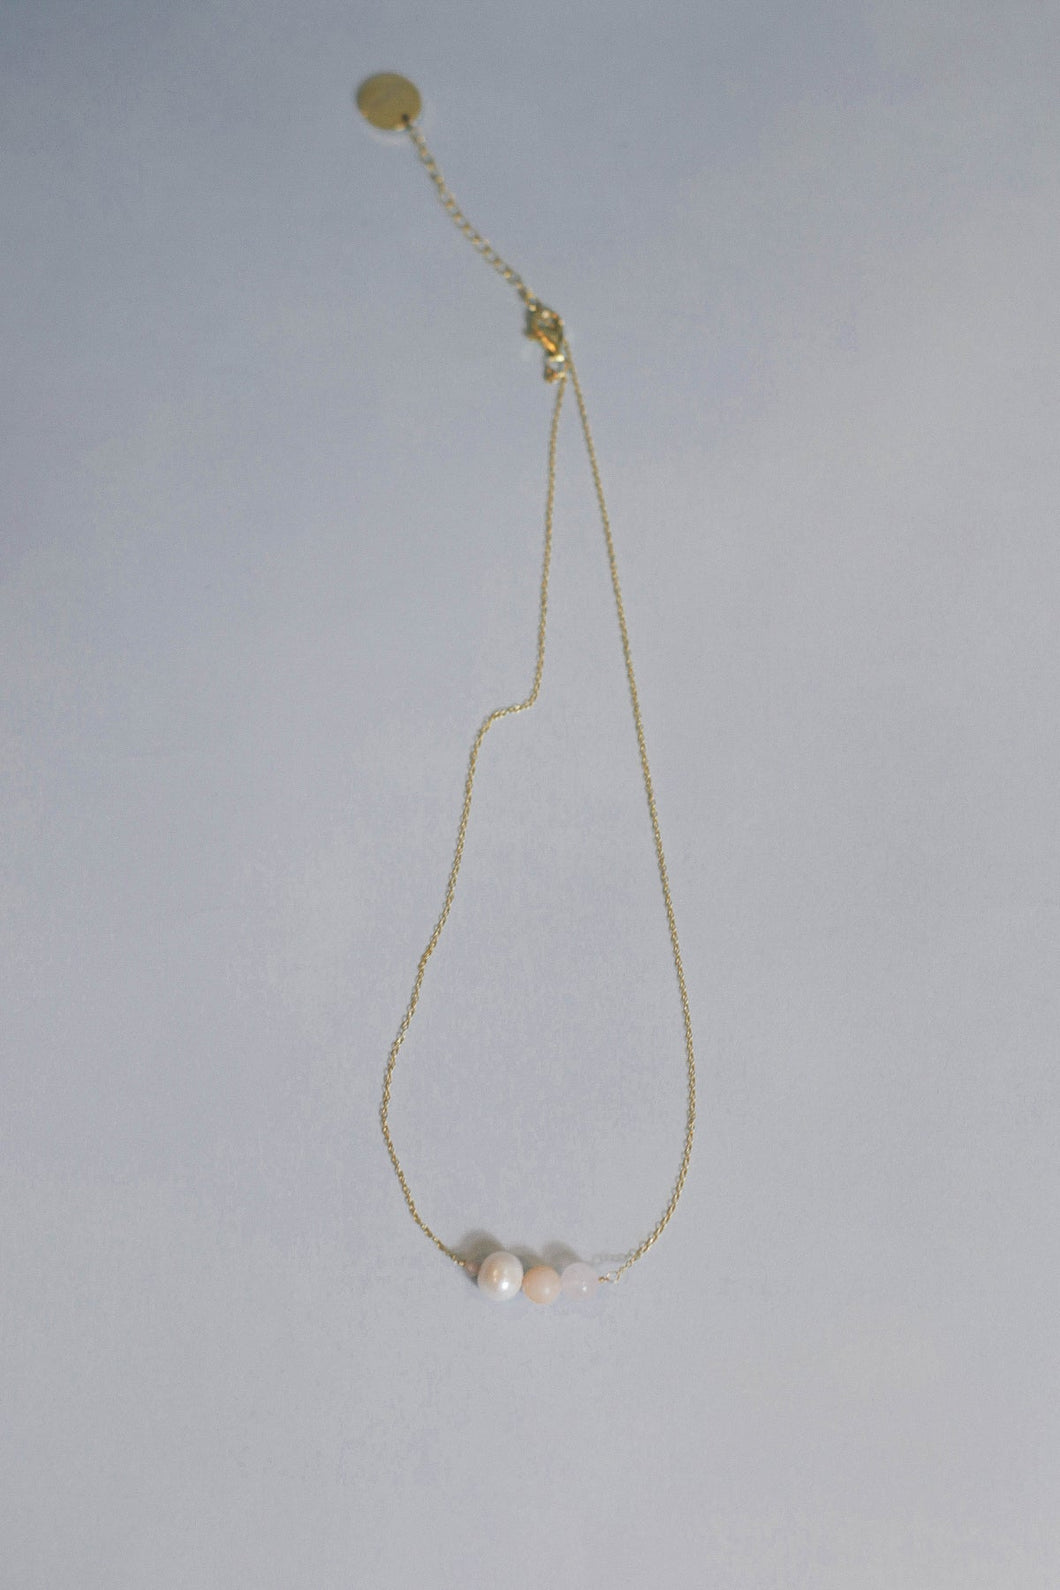 Morgan necklace from morganite and pearl
